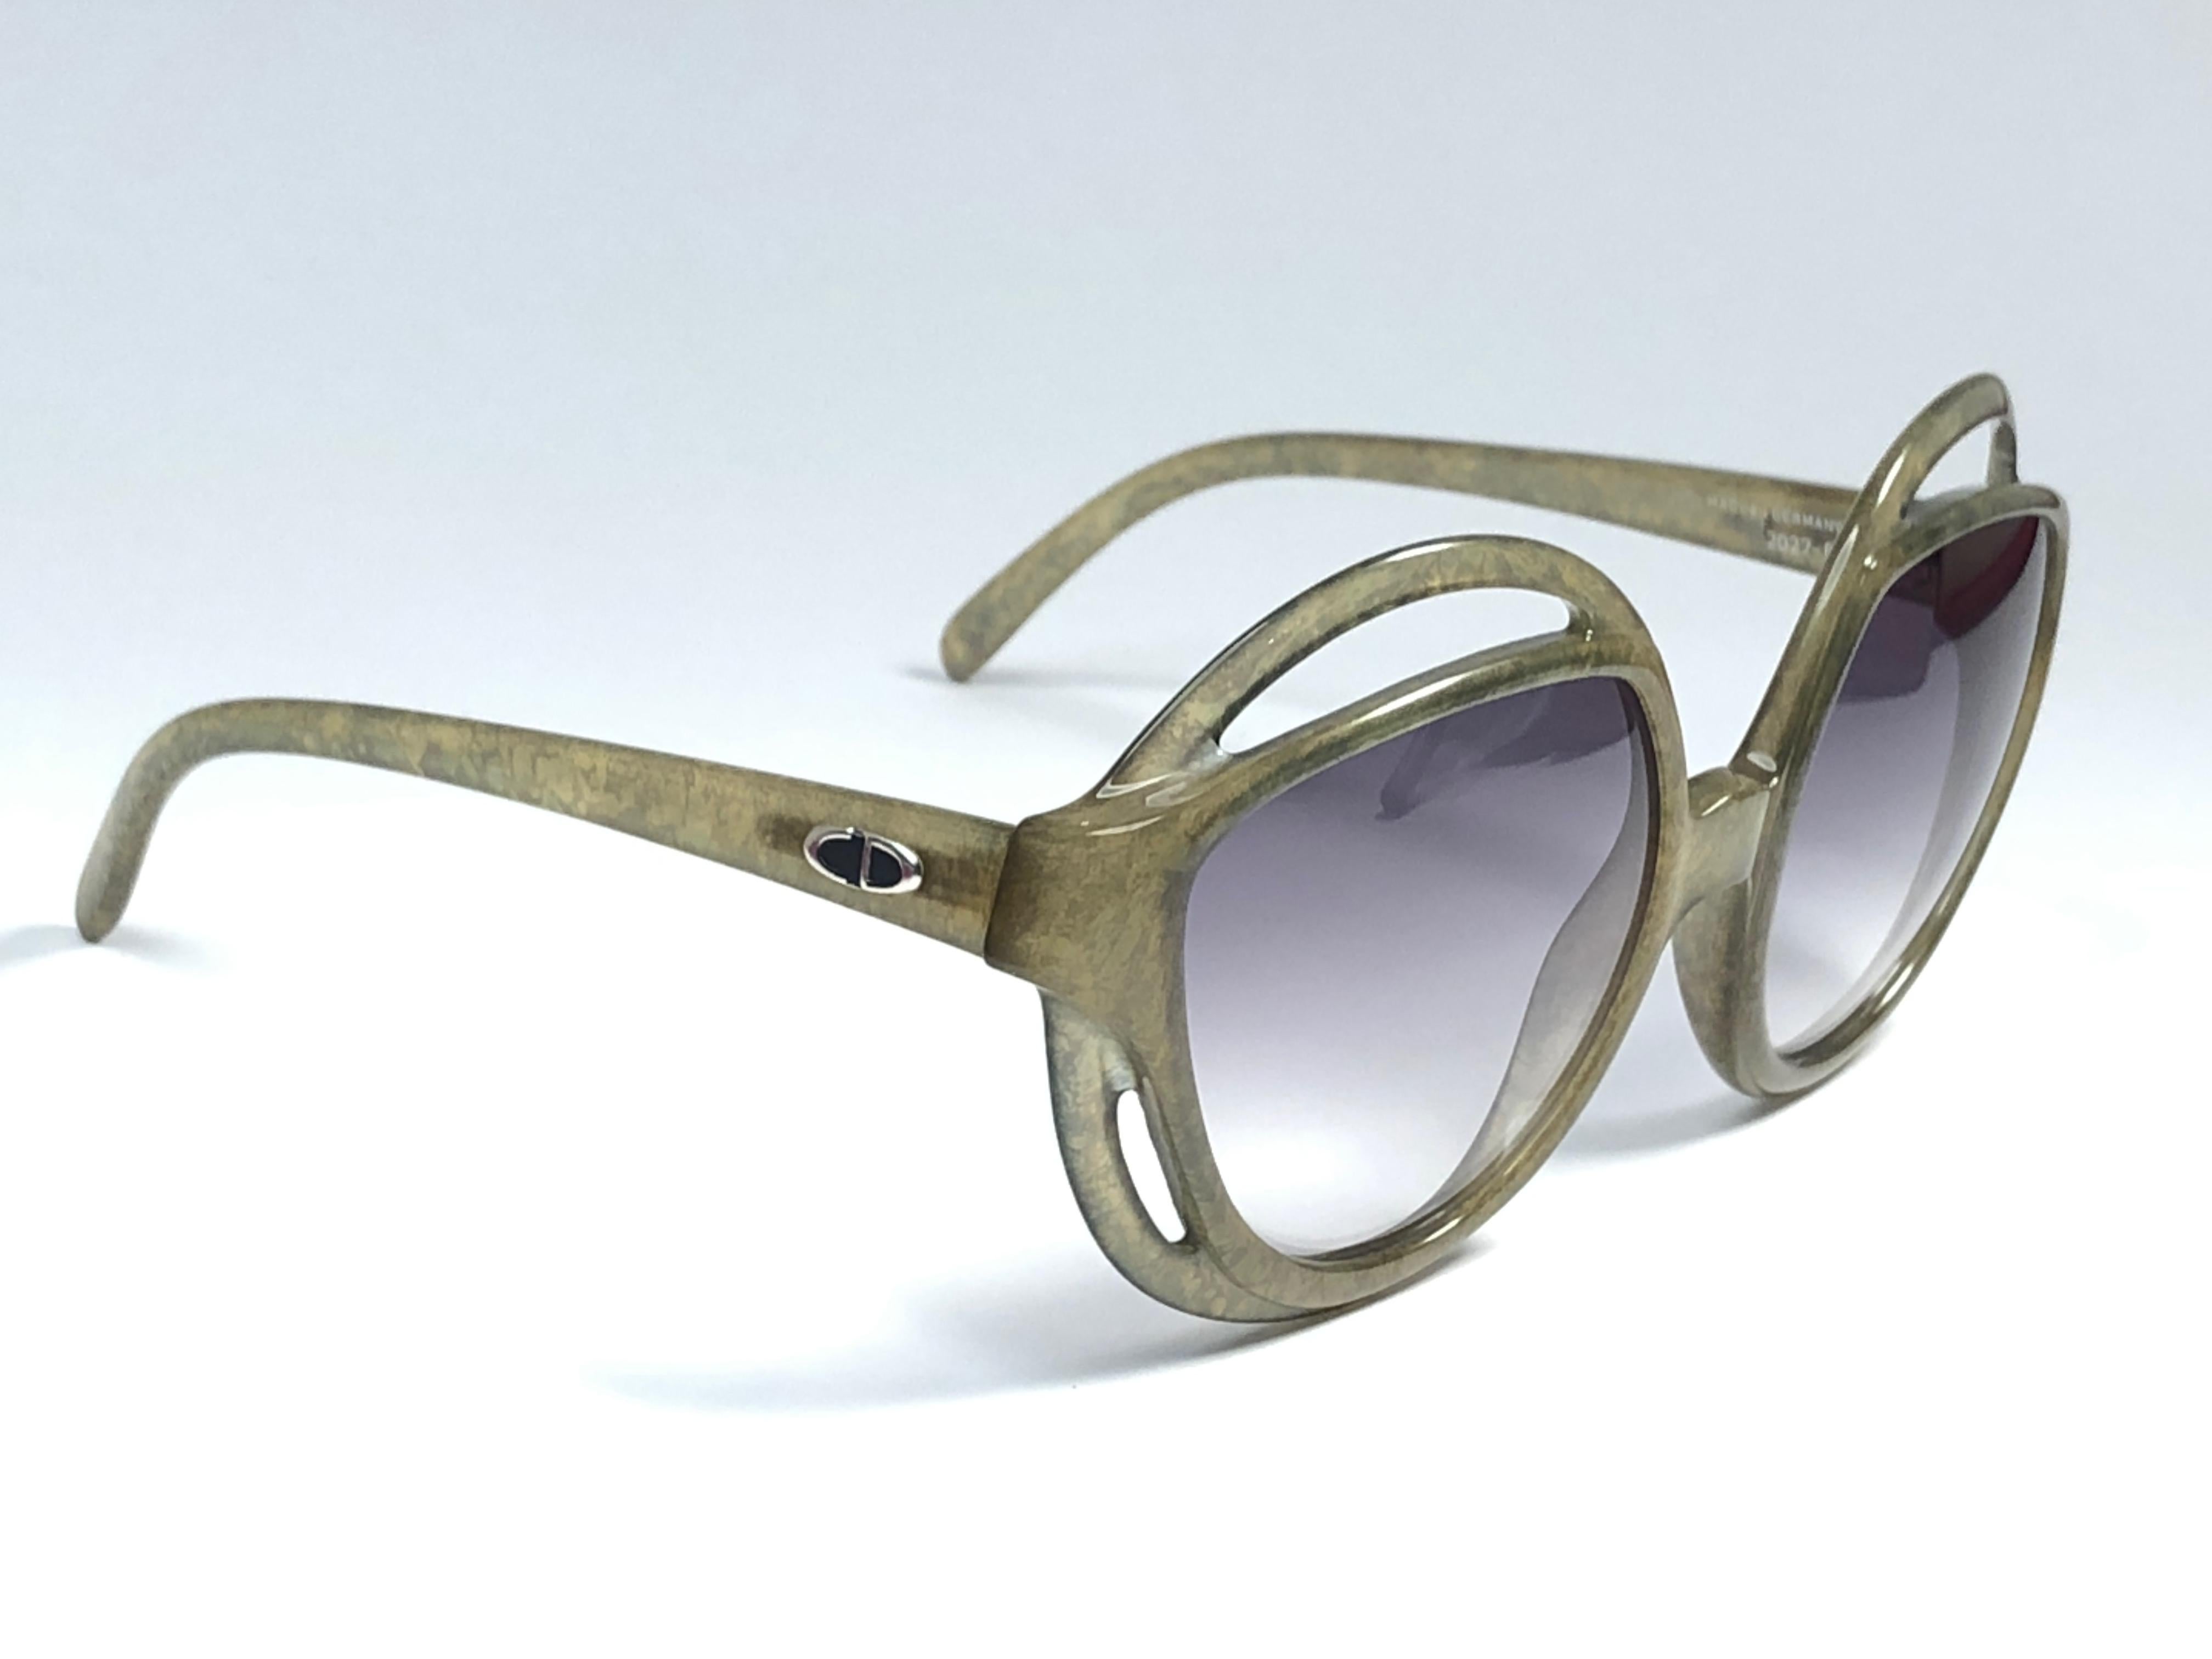 New Vintage Christian Dior 2027 60 Green Jasped frame sporting light gradient lenses. 

Made in Germany.
 
Produced and design in 1970's.

A collector’s piece!

This item show minor sign of wear due to storage.

No case or Dior Sleeve included. 